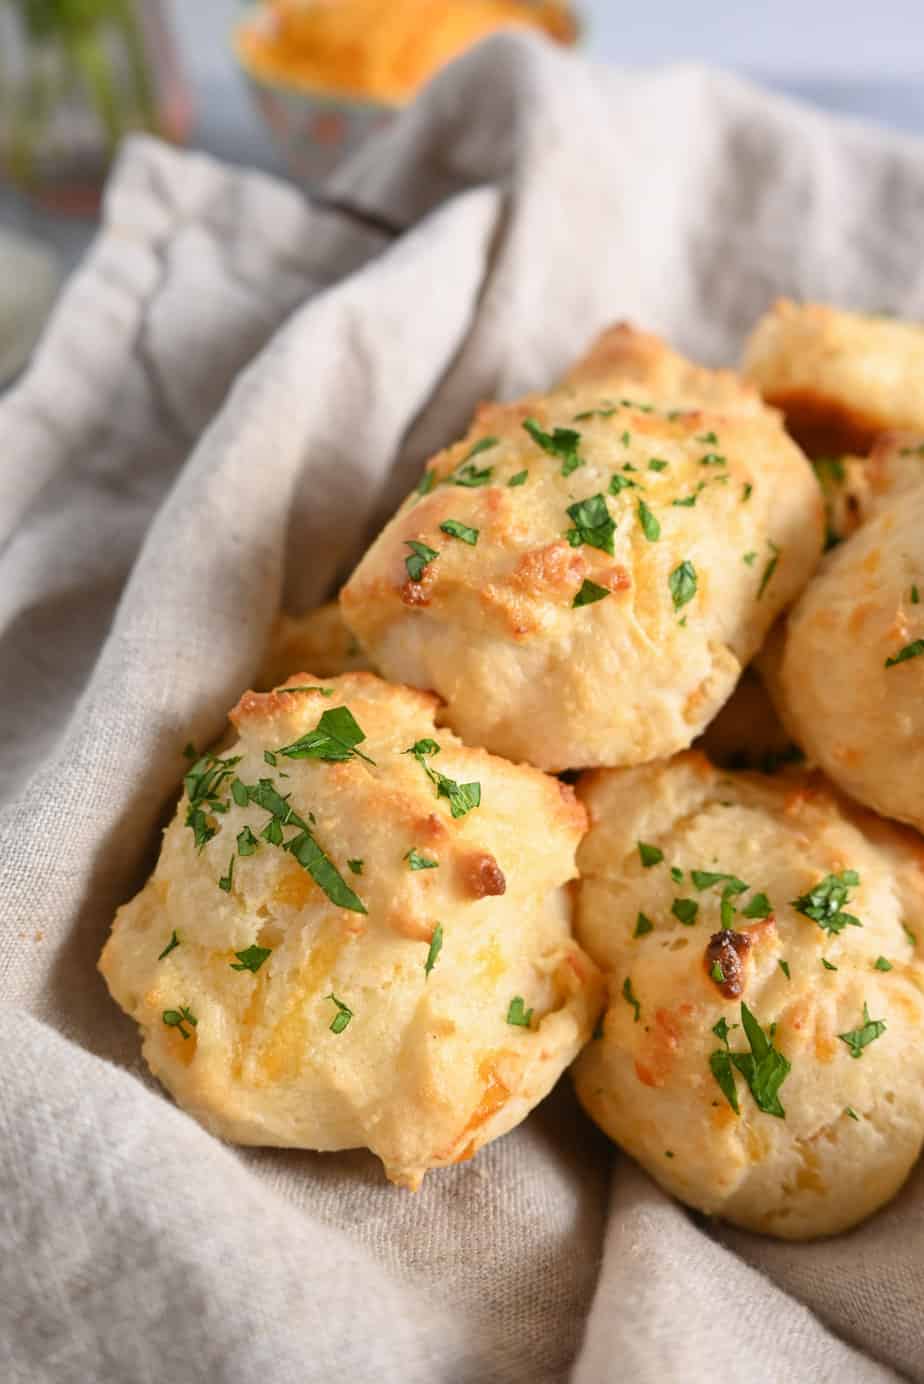 https://www.stephiecooks.com/wp-content/uploads/2013/06/close-up-red-lobster-biscuits.jpg